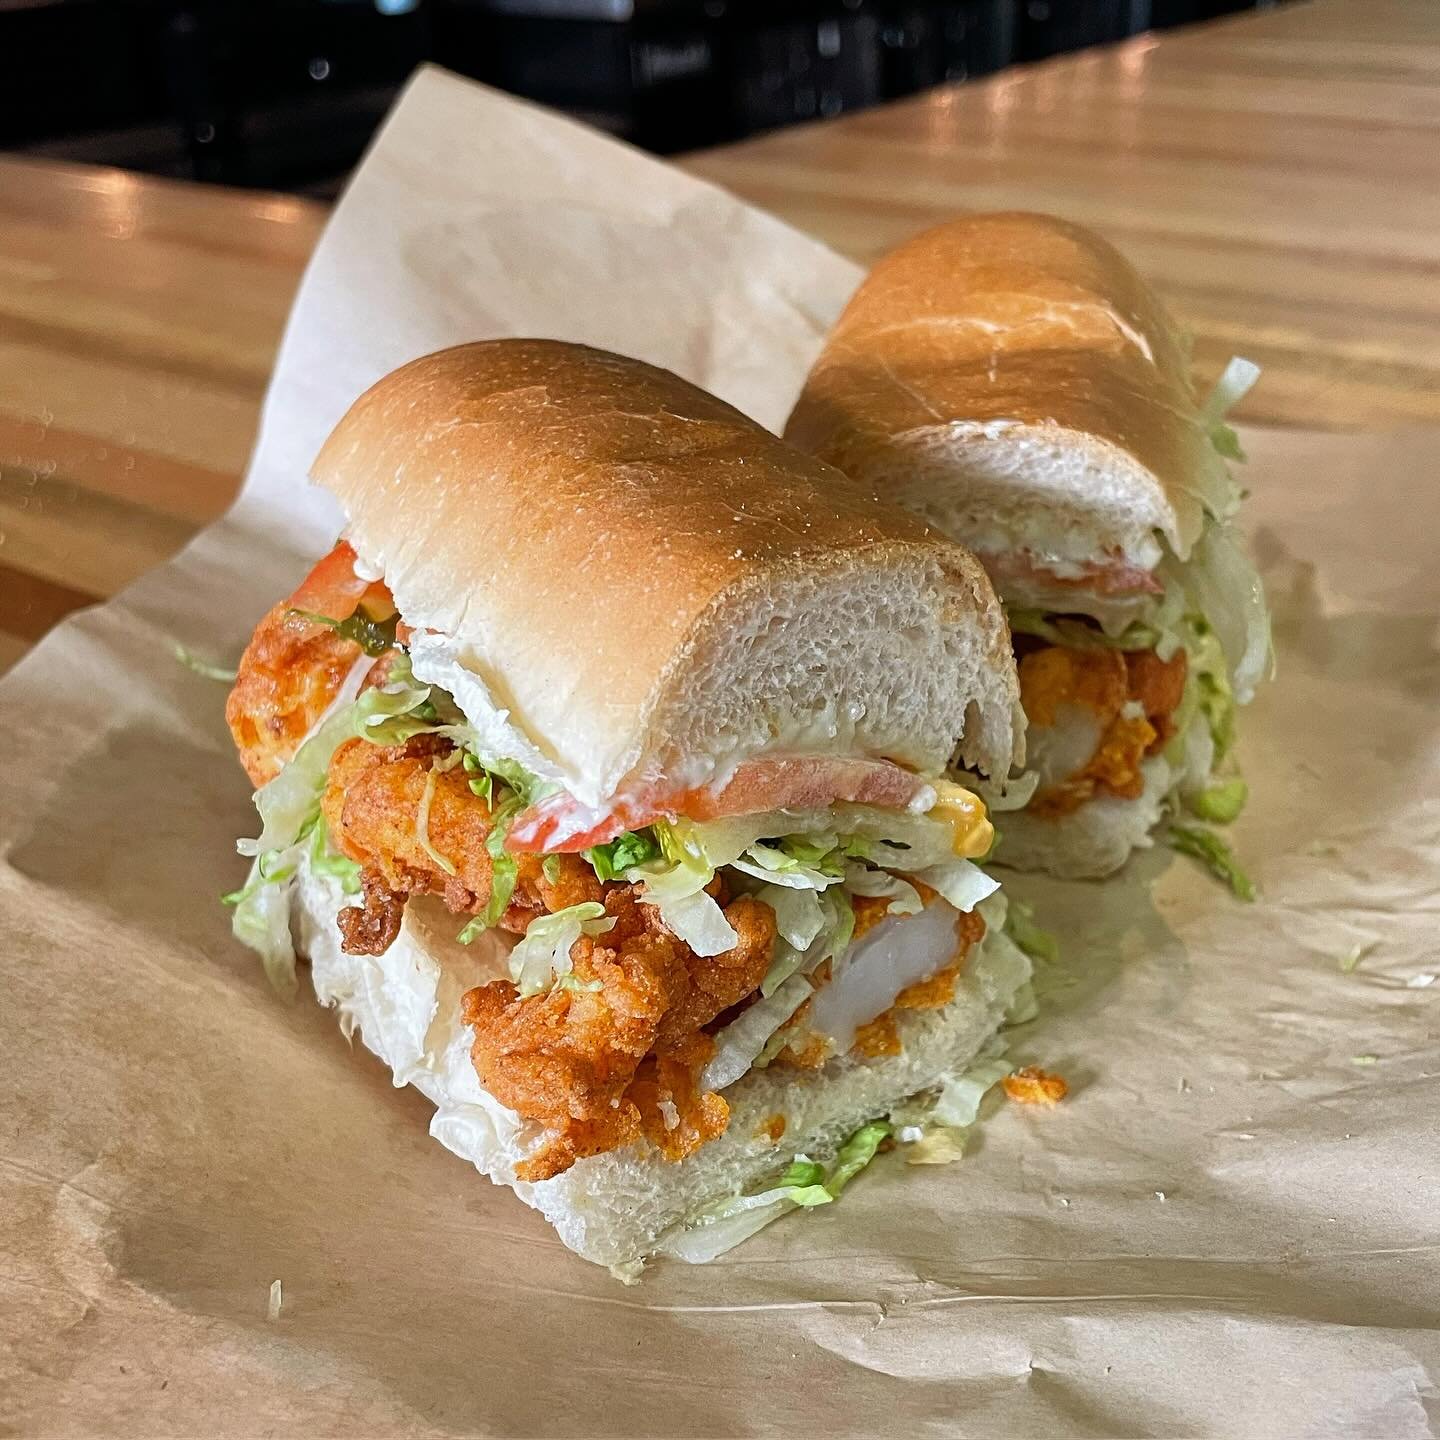 It&rsquo;s that time again, weekly Wednesday Po&rsquo; Boy BOGO 💥

Enjoy Fried Shrimp or Catfish, Cochon de Lait, Smoked Deviled Egg Salad, Hot Sausage or Beef Debris Po&rsquo; Boys 🤤

Use code BOGO7769 when you order online through Toast and indul